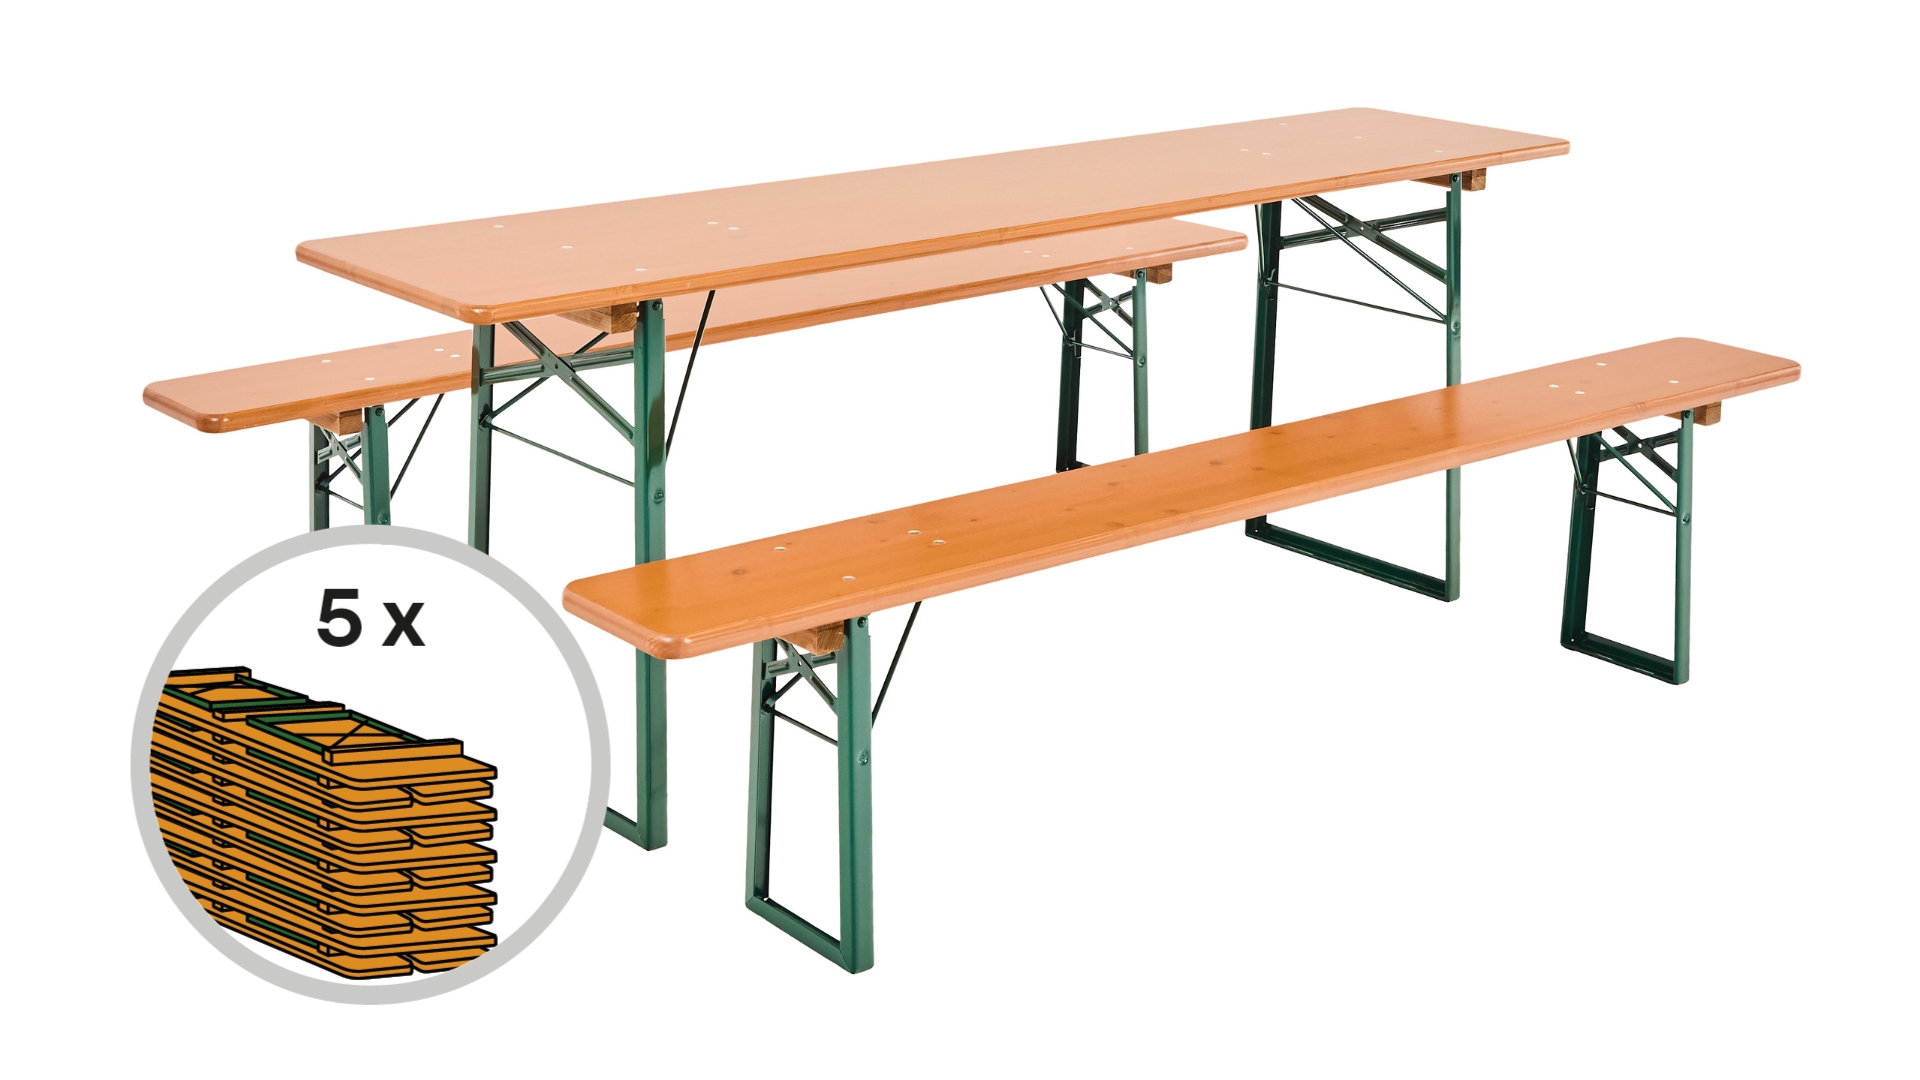 The classic set of 5 beer table sets in the color pine